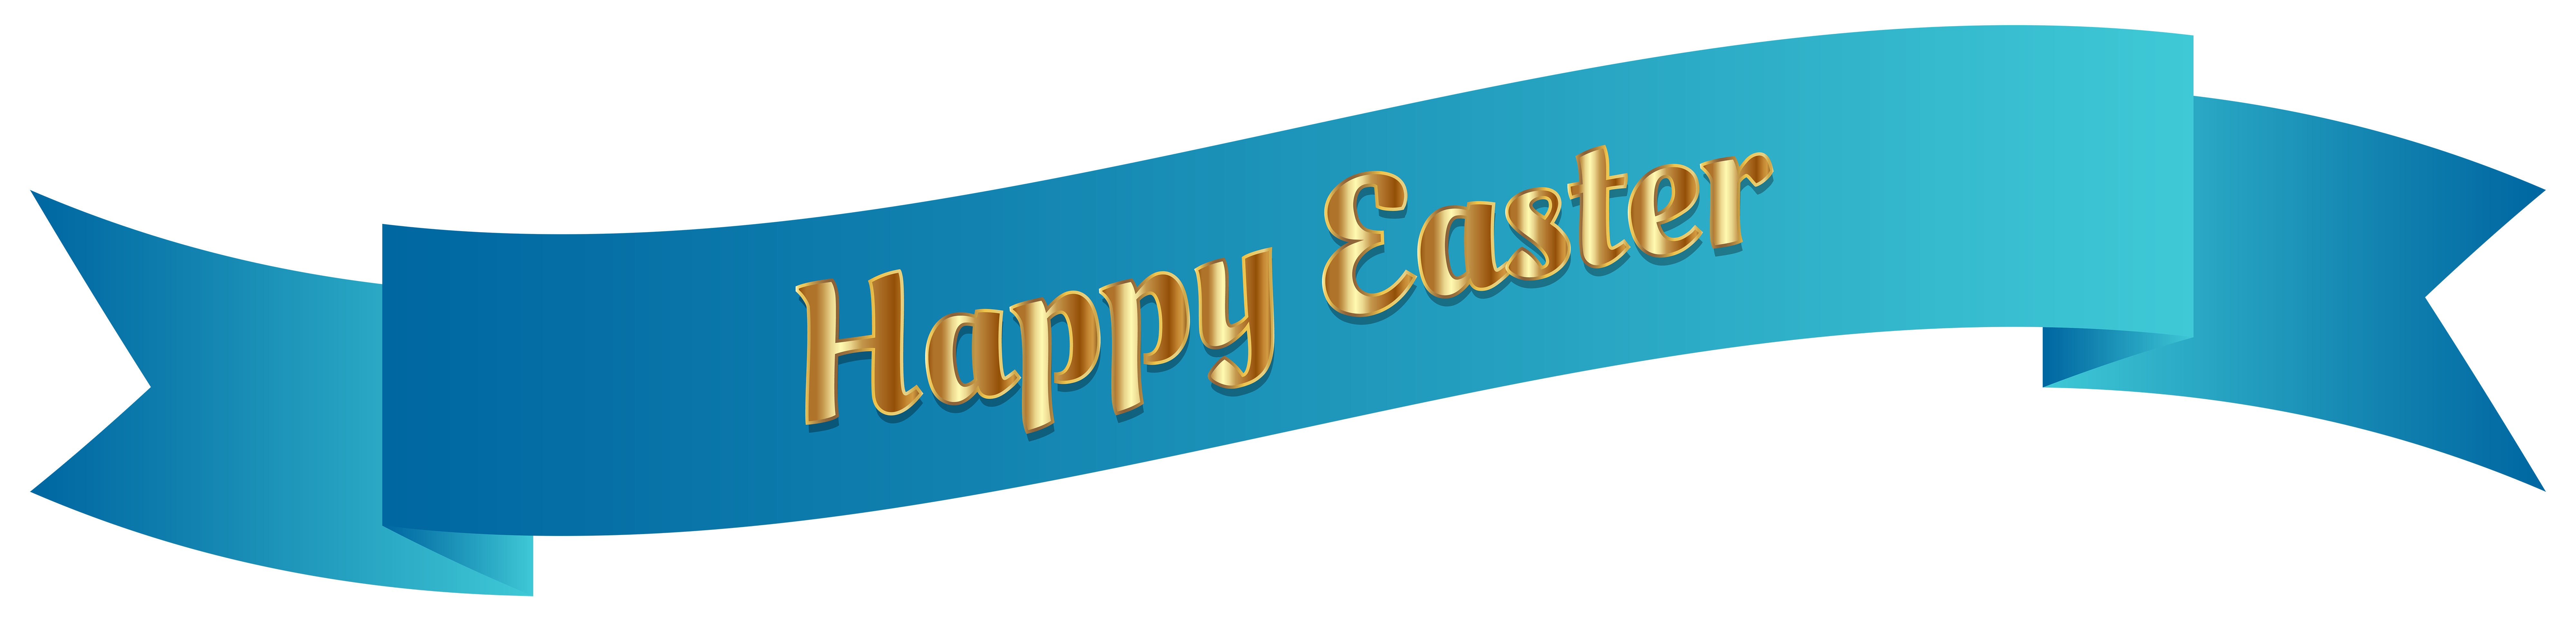 easter-banner-cliparts-free-download-on-clipartmag